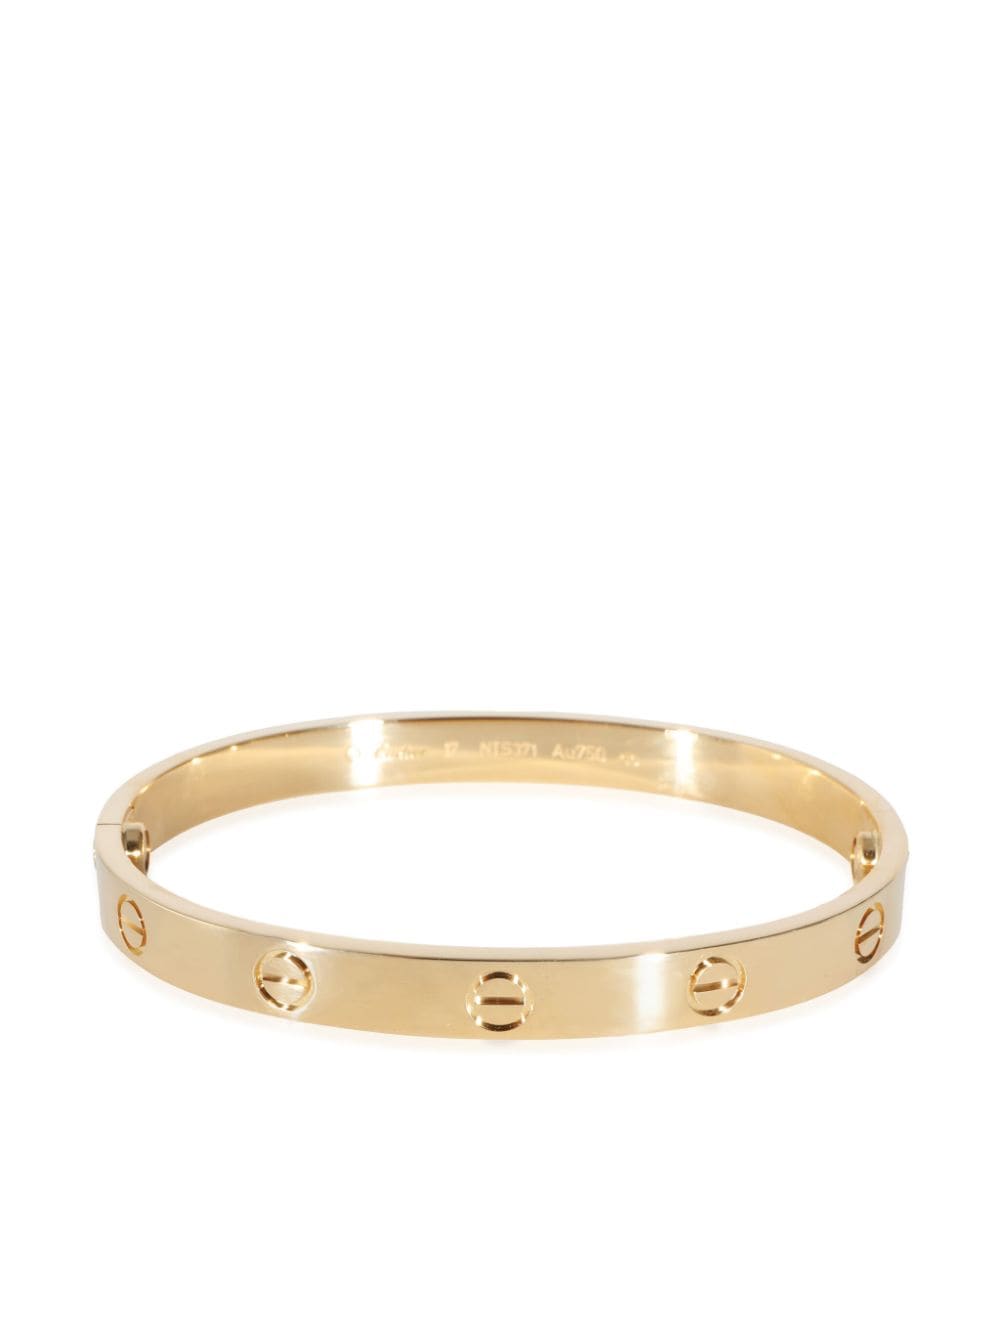 Pre-owned Cartier  18kt Yellow Gold Love Bracelet